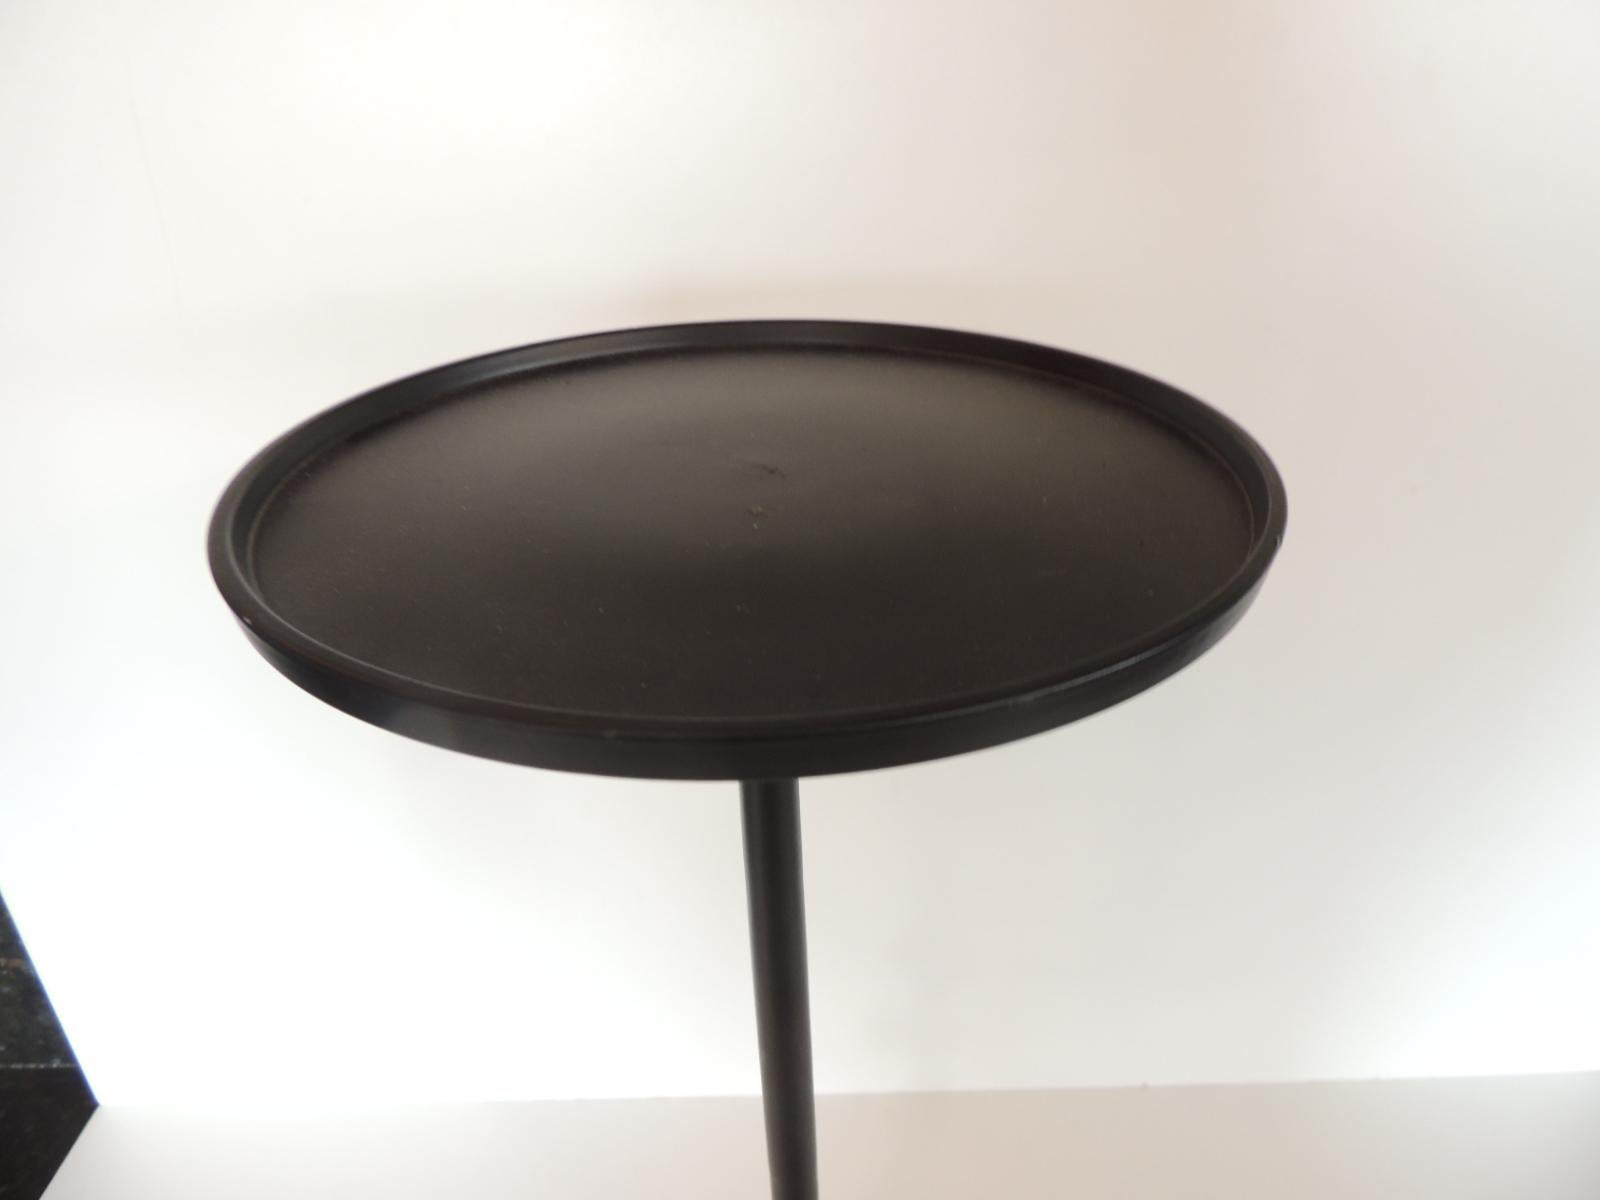 Small round black metal drinks table with round base.
Size: 8.3/4